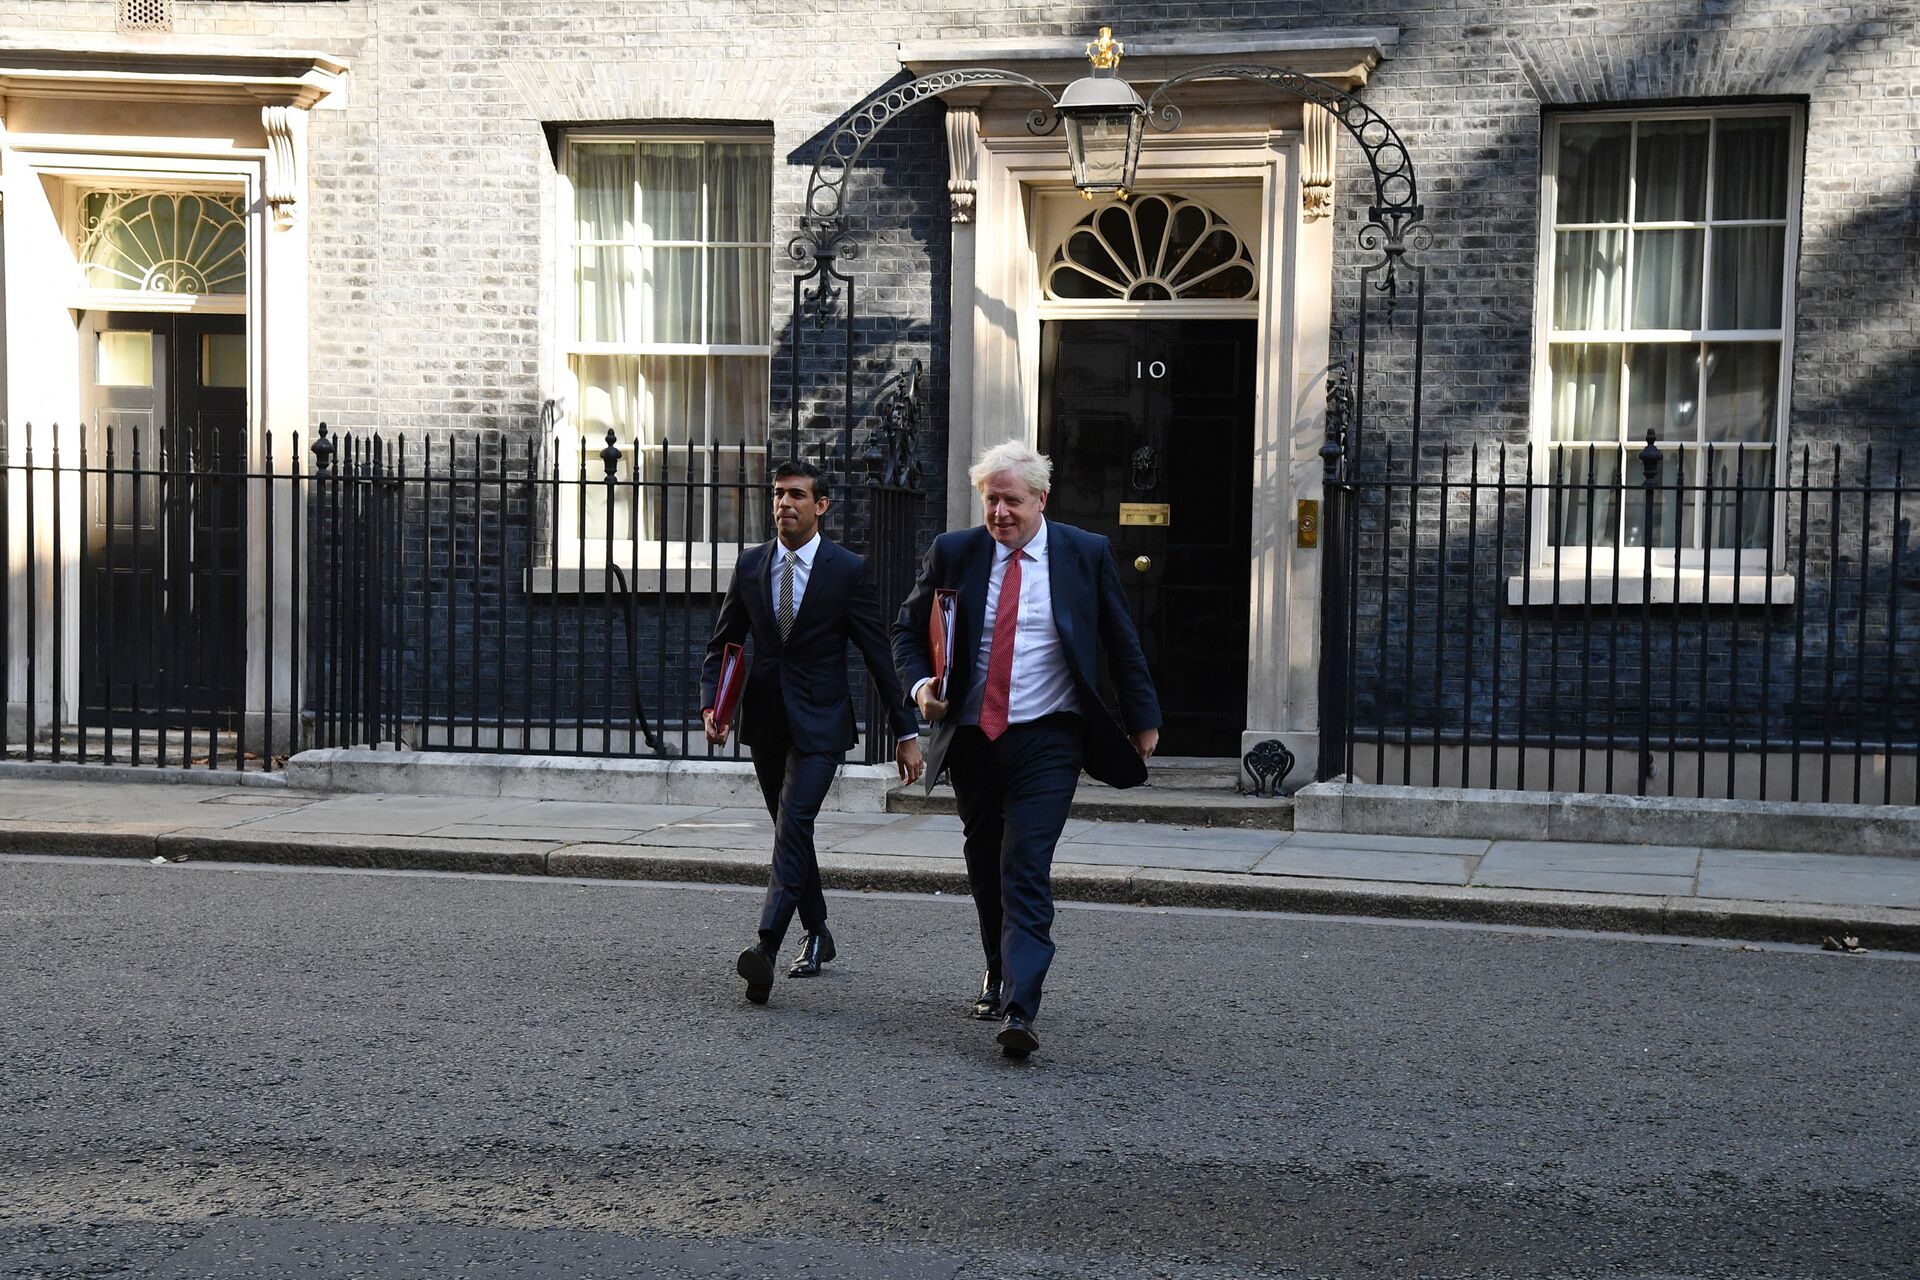 Britain's Prime Minister Boris Johnson (R) and Britain's Chancellor of the Exchequer Rishi Sunak (L) leave 10 Downing Street in central London on September 1, 2020 to walk through to the Foreign and Commonwealth Office to attend the first weekly meeting of the cabinet since the summer recess.  - Sputnik International, 1920, 07.09.2021